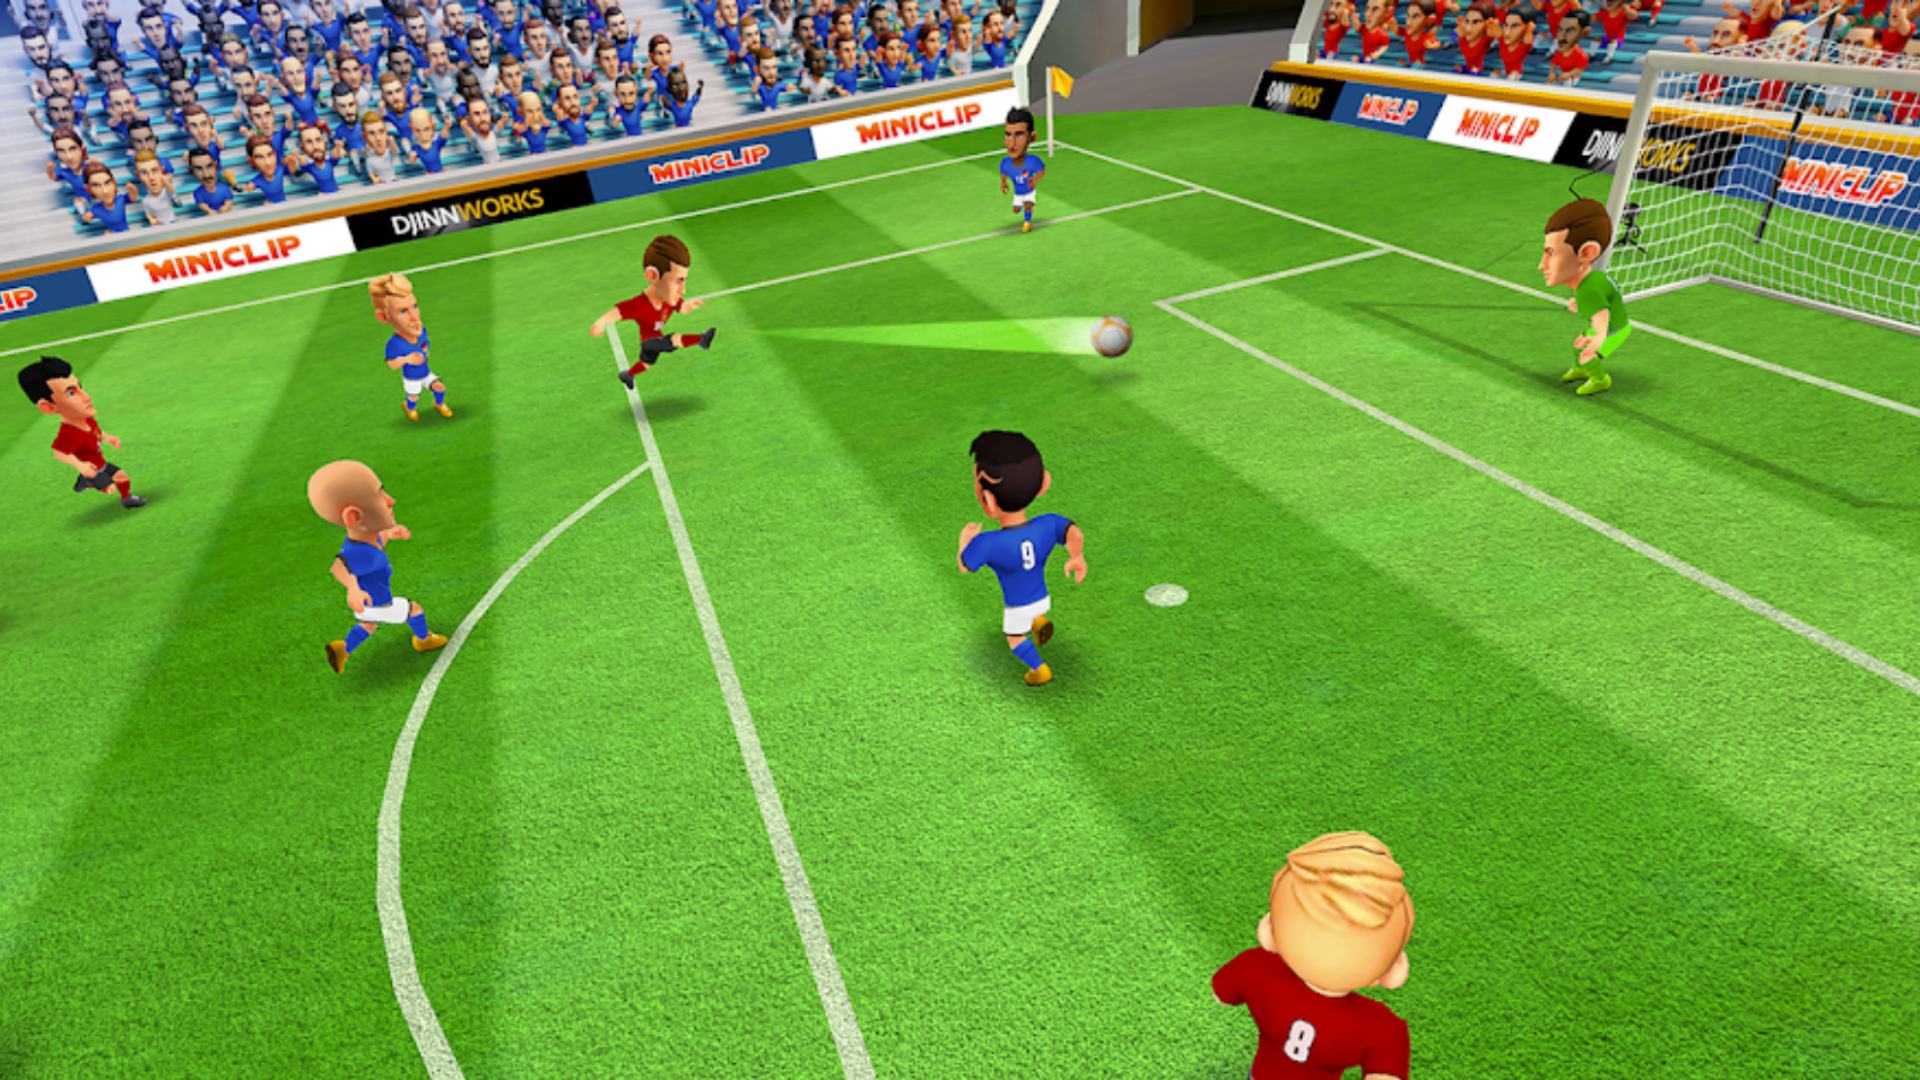 Mini Soccer Star APK Download for Android Free